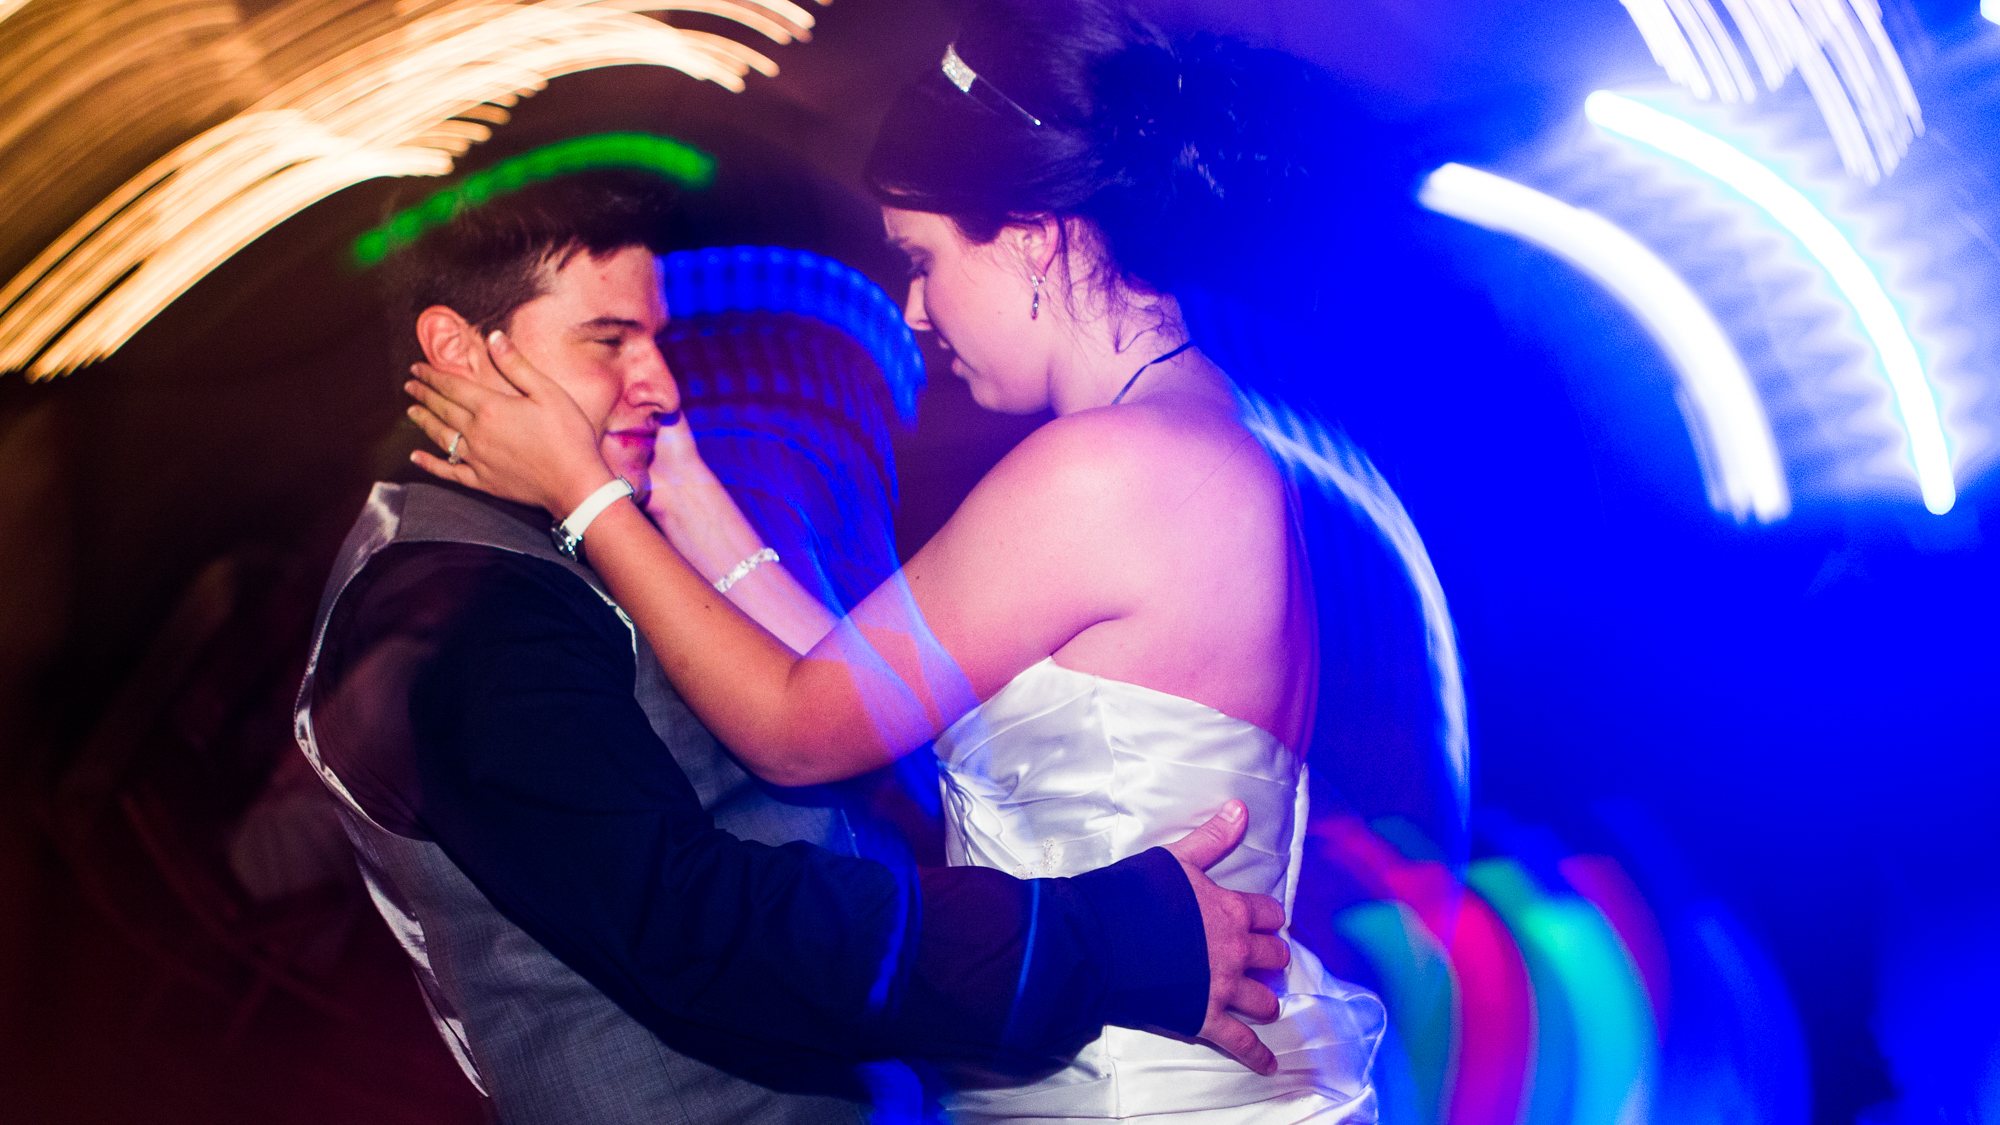 wedding photography and video in dallas of a married couple dating to the DJ's music.